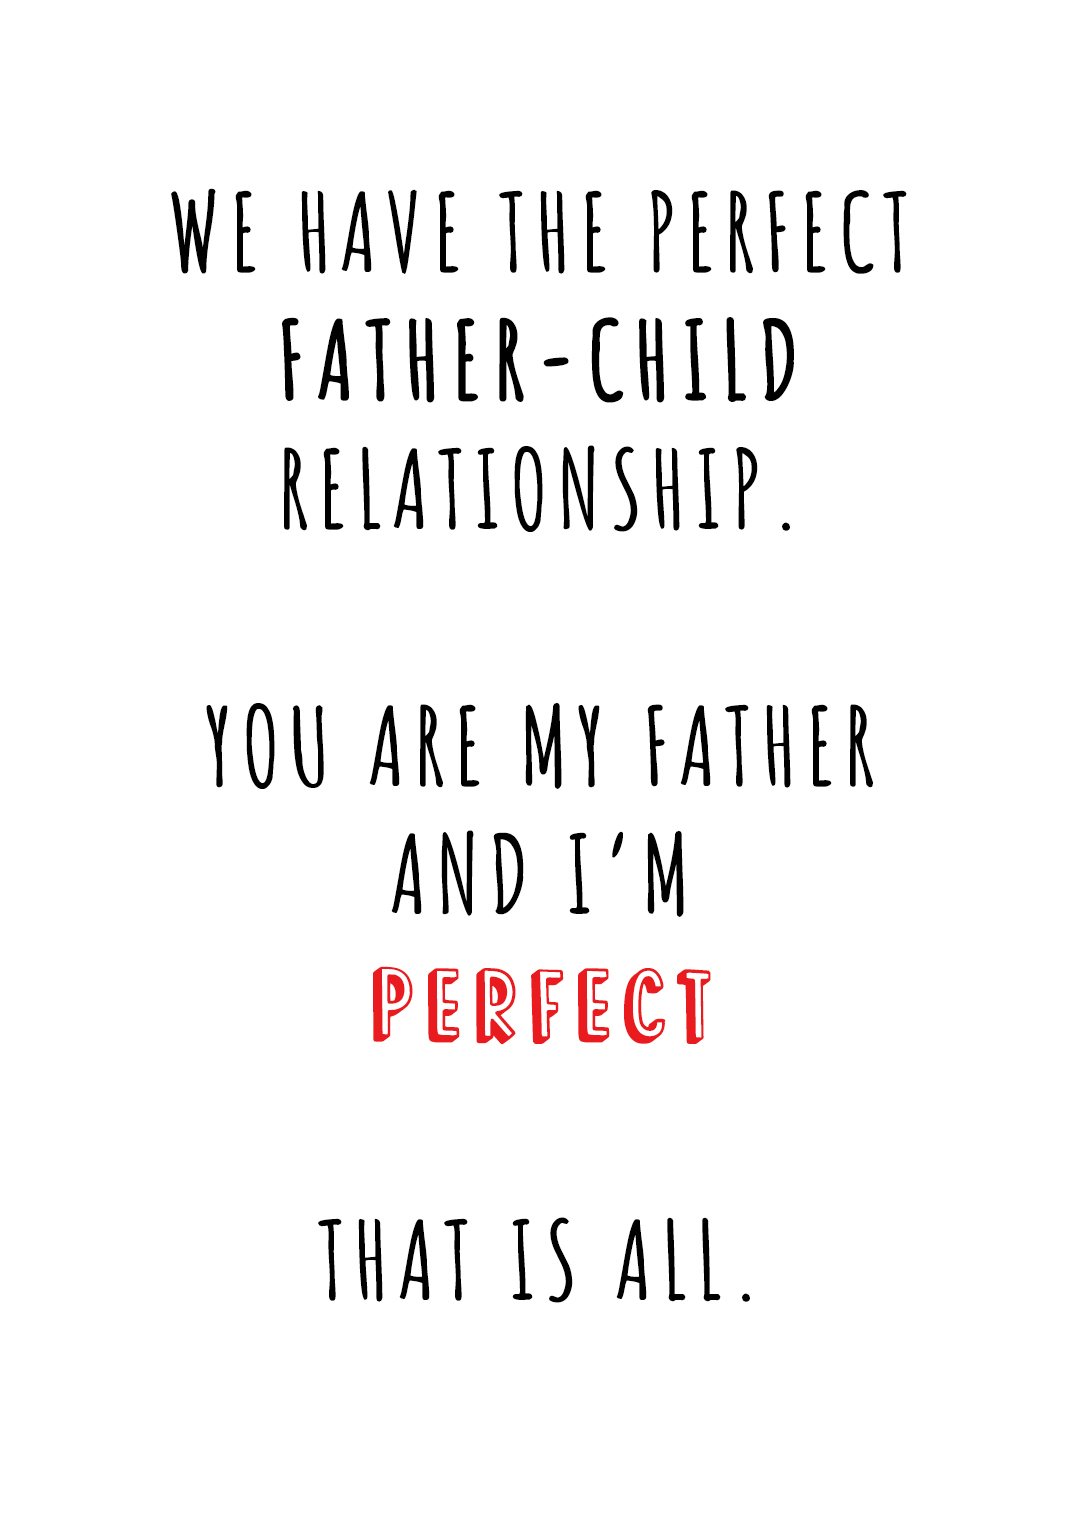 Perfect Father-Child Relationship Greeting Card